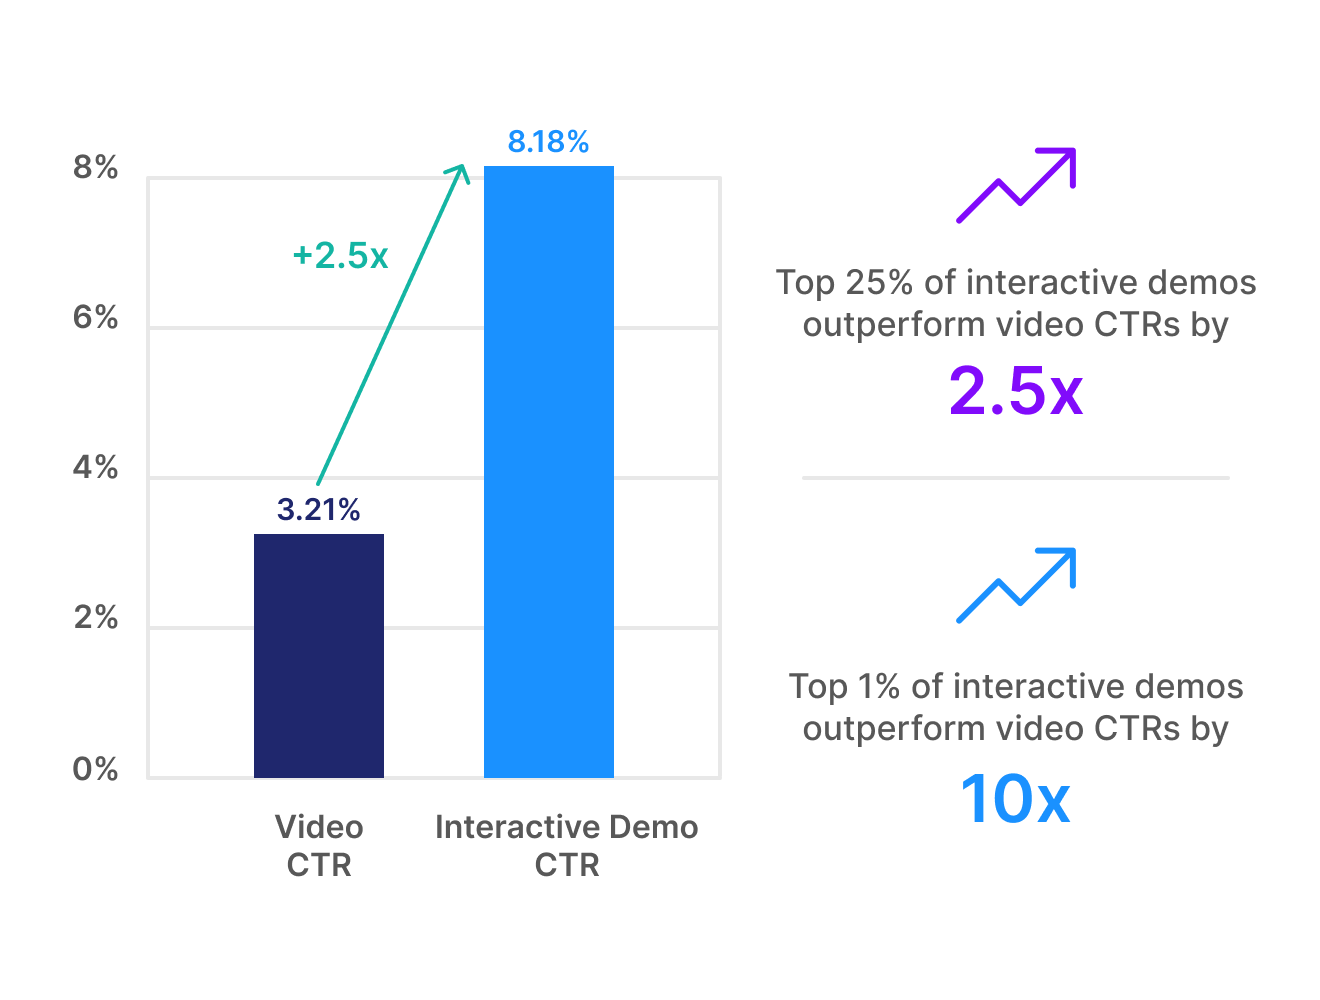  How do interactive demos compare to videos graphic?